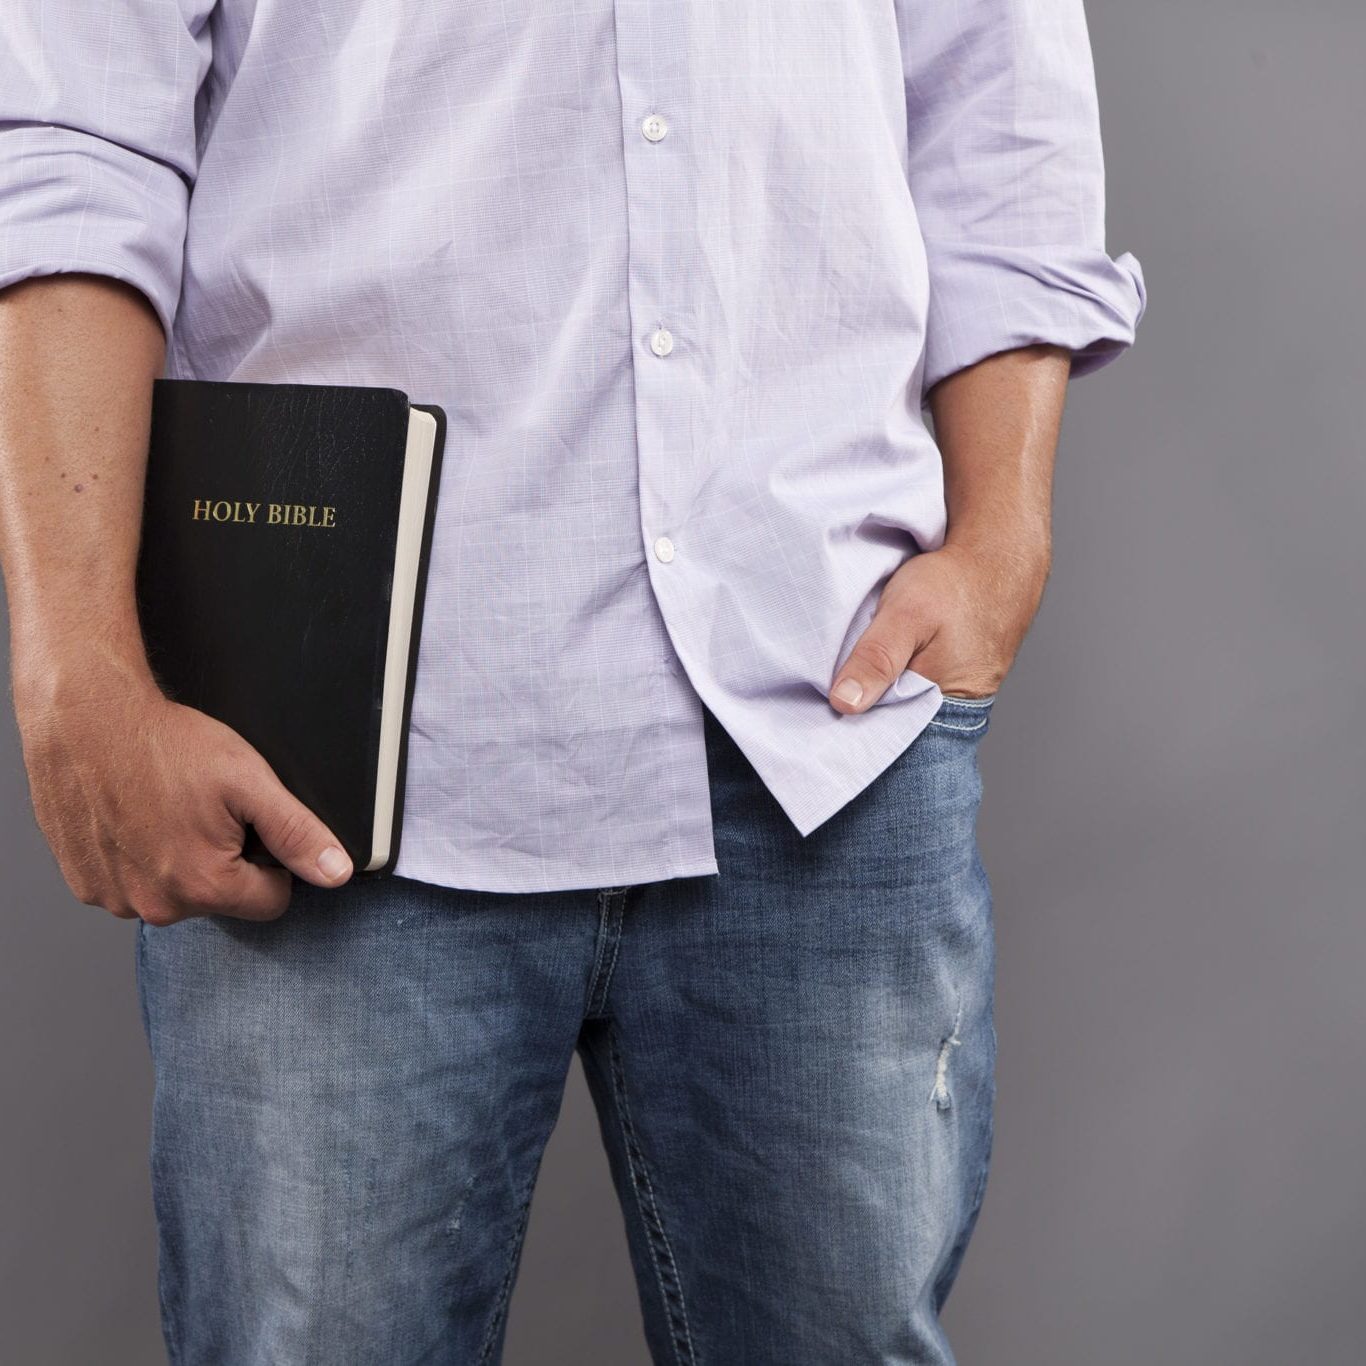 A man stands indoors with one hand holding a black bible and the other hand casually in his jeans pocket.